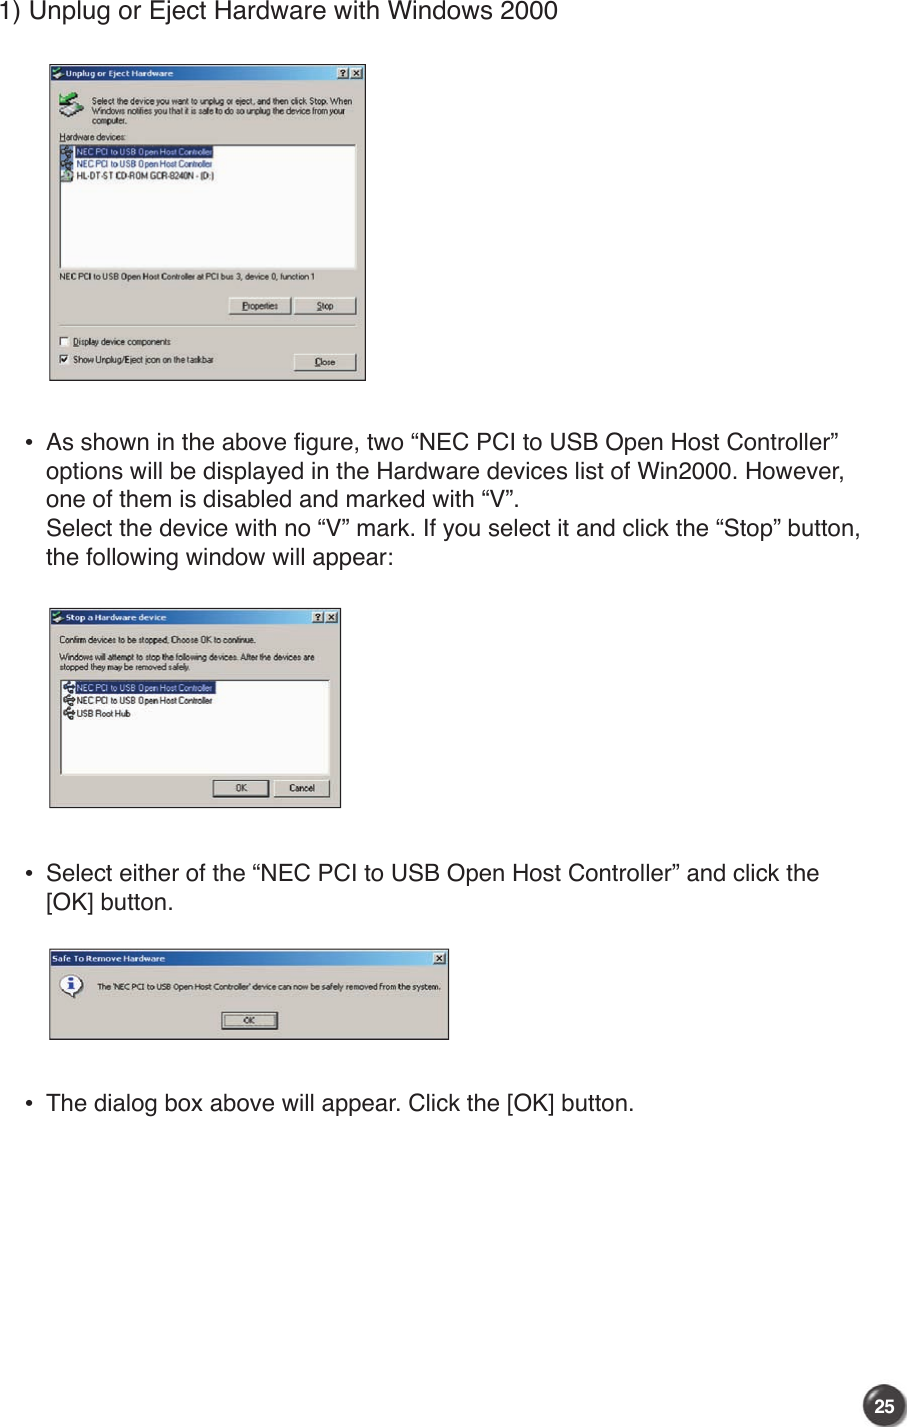 25241) Unplug or Eject Hardware with Windows 2000 •   As shown in the above figure, two “NEC PCI to USB Open Host Controller” options will be displayed in the Hardware devices list of Win2000. However, one of them is disabled and marked with “V”.         Select the device with no “V” mark. If you select it and click the “Stop” button, the following window will appear: •   Select either of the “NEC PCI to USB Open Host Controller” and click the [OK] button. •   The dialog box above will appear. Click the [OK] button.